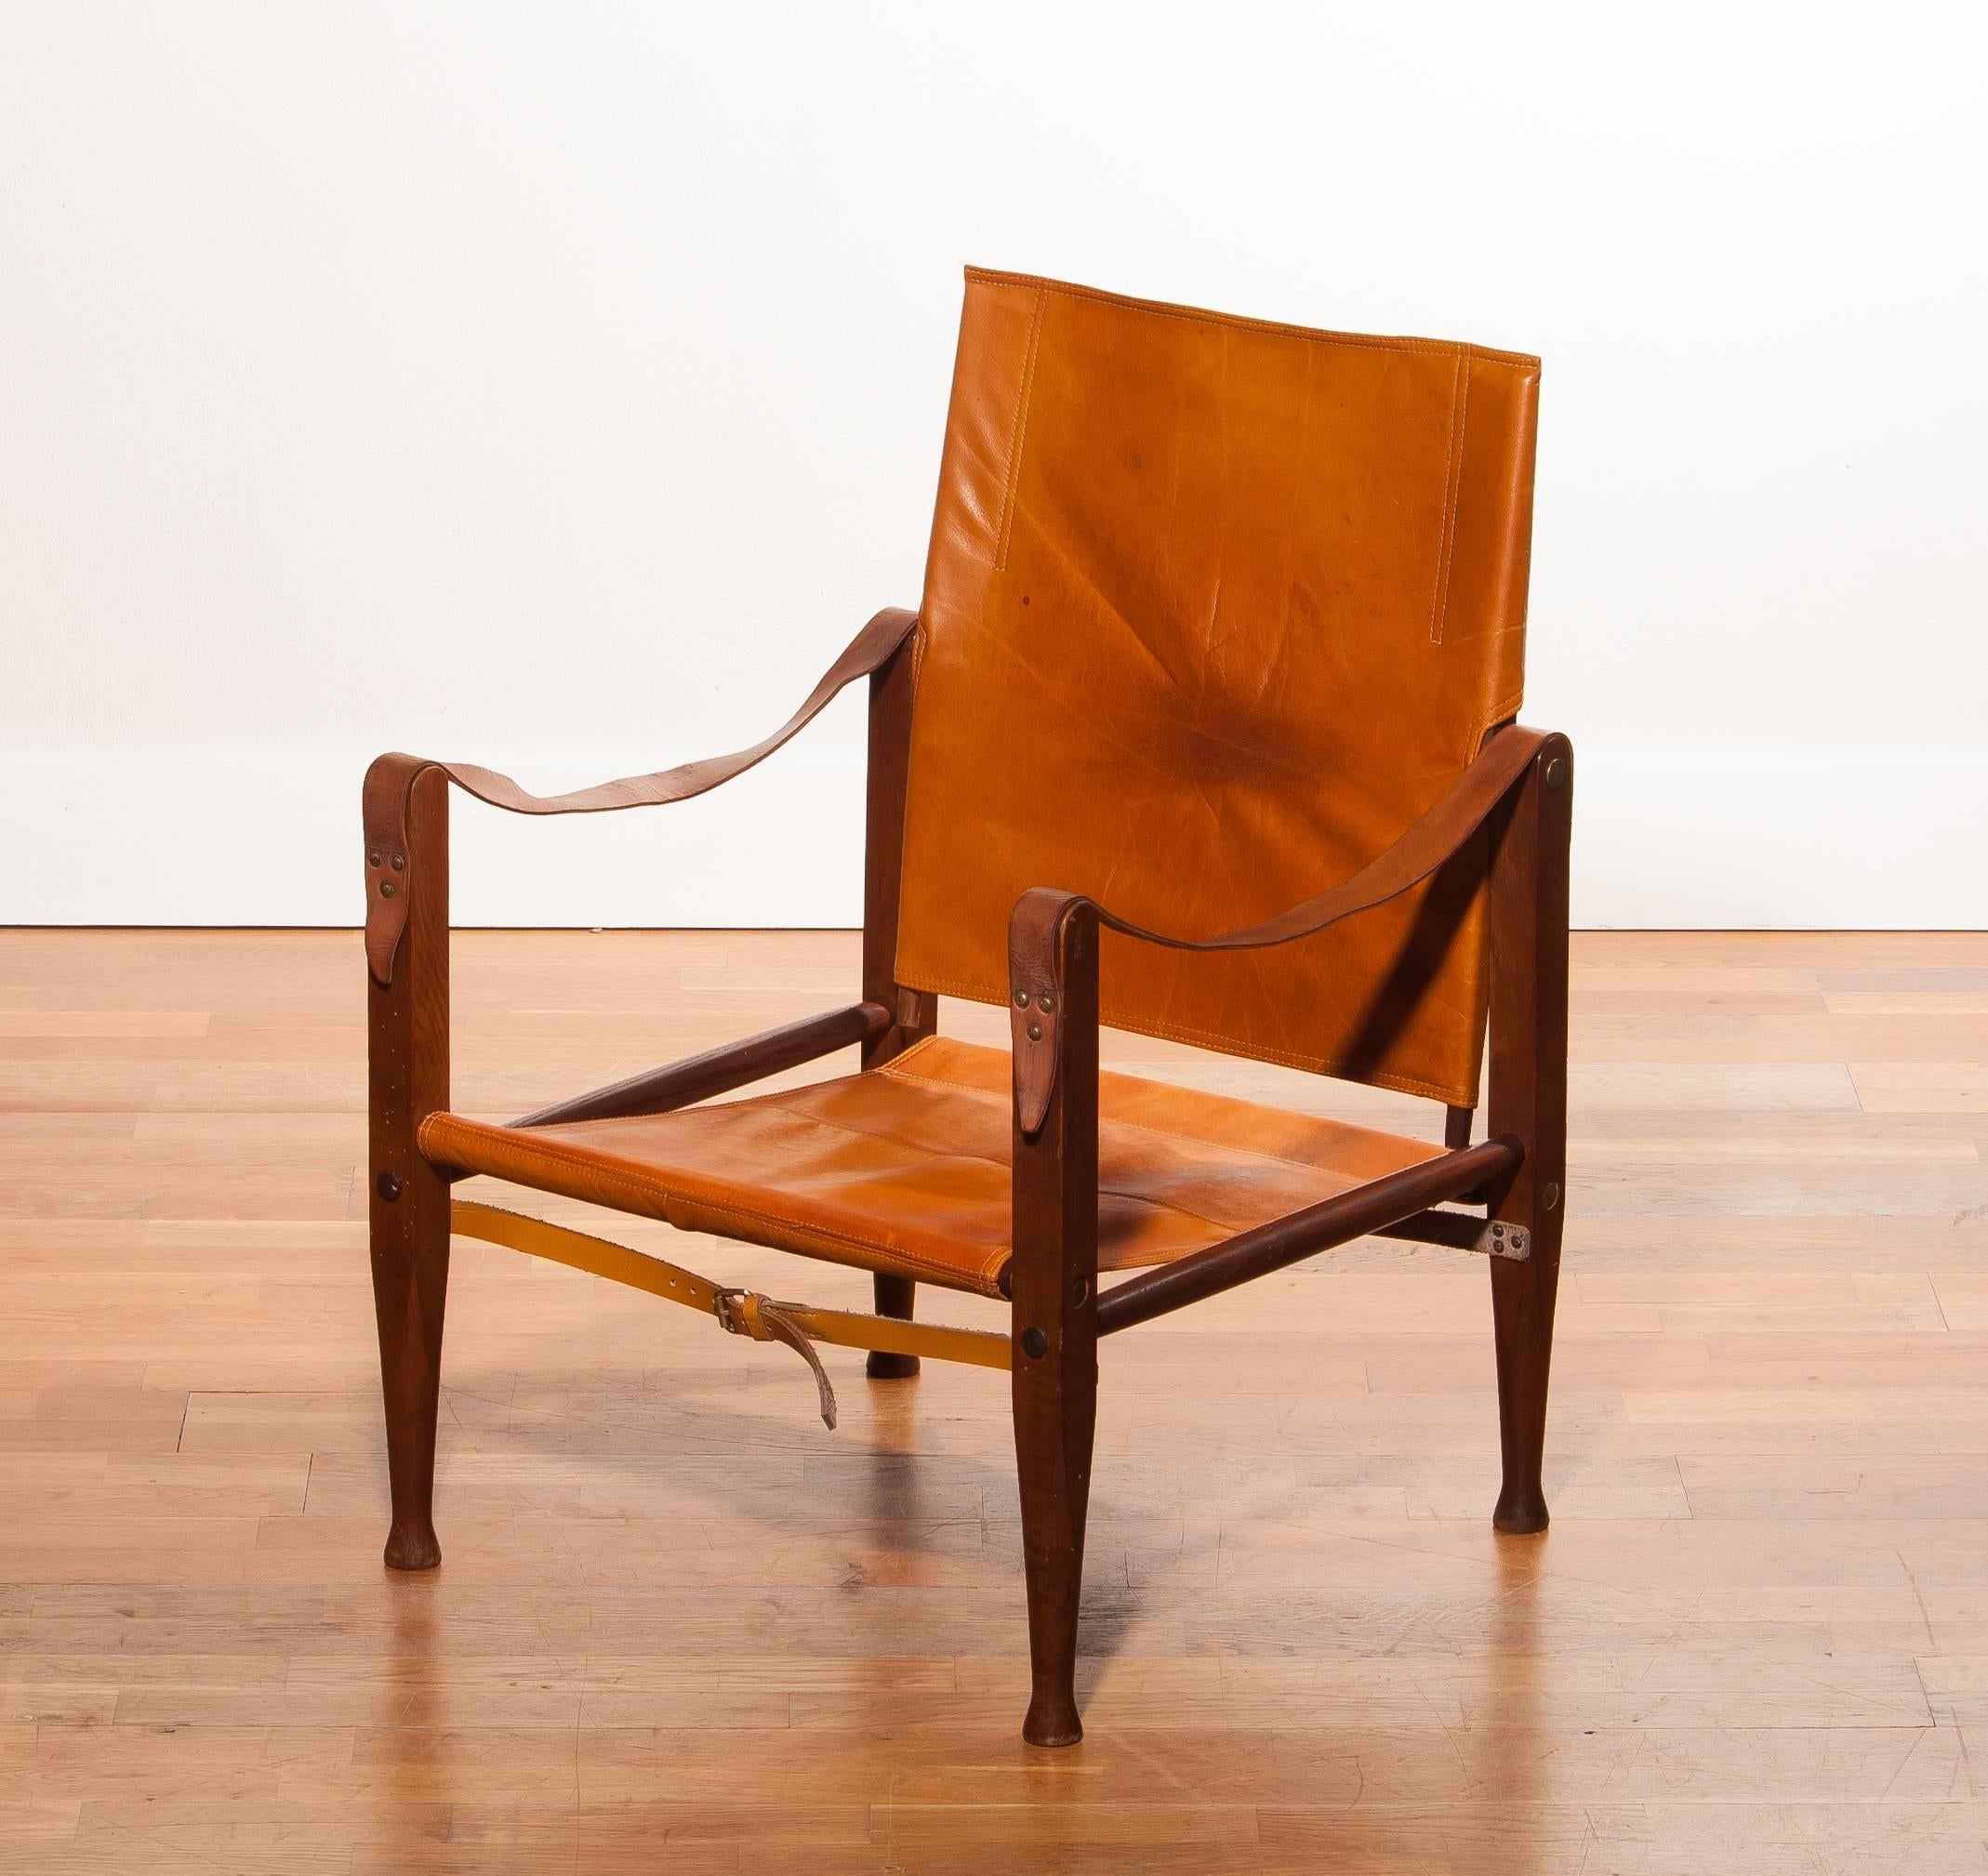 Beautiful safari chair designed by Kaare Klint for Red, Rasmussen Denmark.
This chair has a very nice patinated cognac leather seating on a wooden frame.
It is in a good condition with few signs of age related wear.
Period 1930s
Dimensions: H. 81